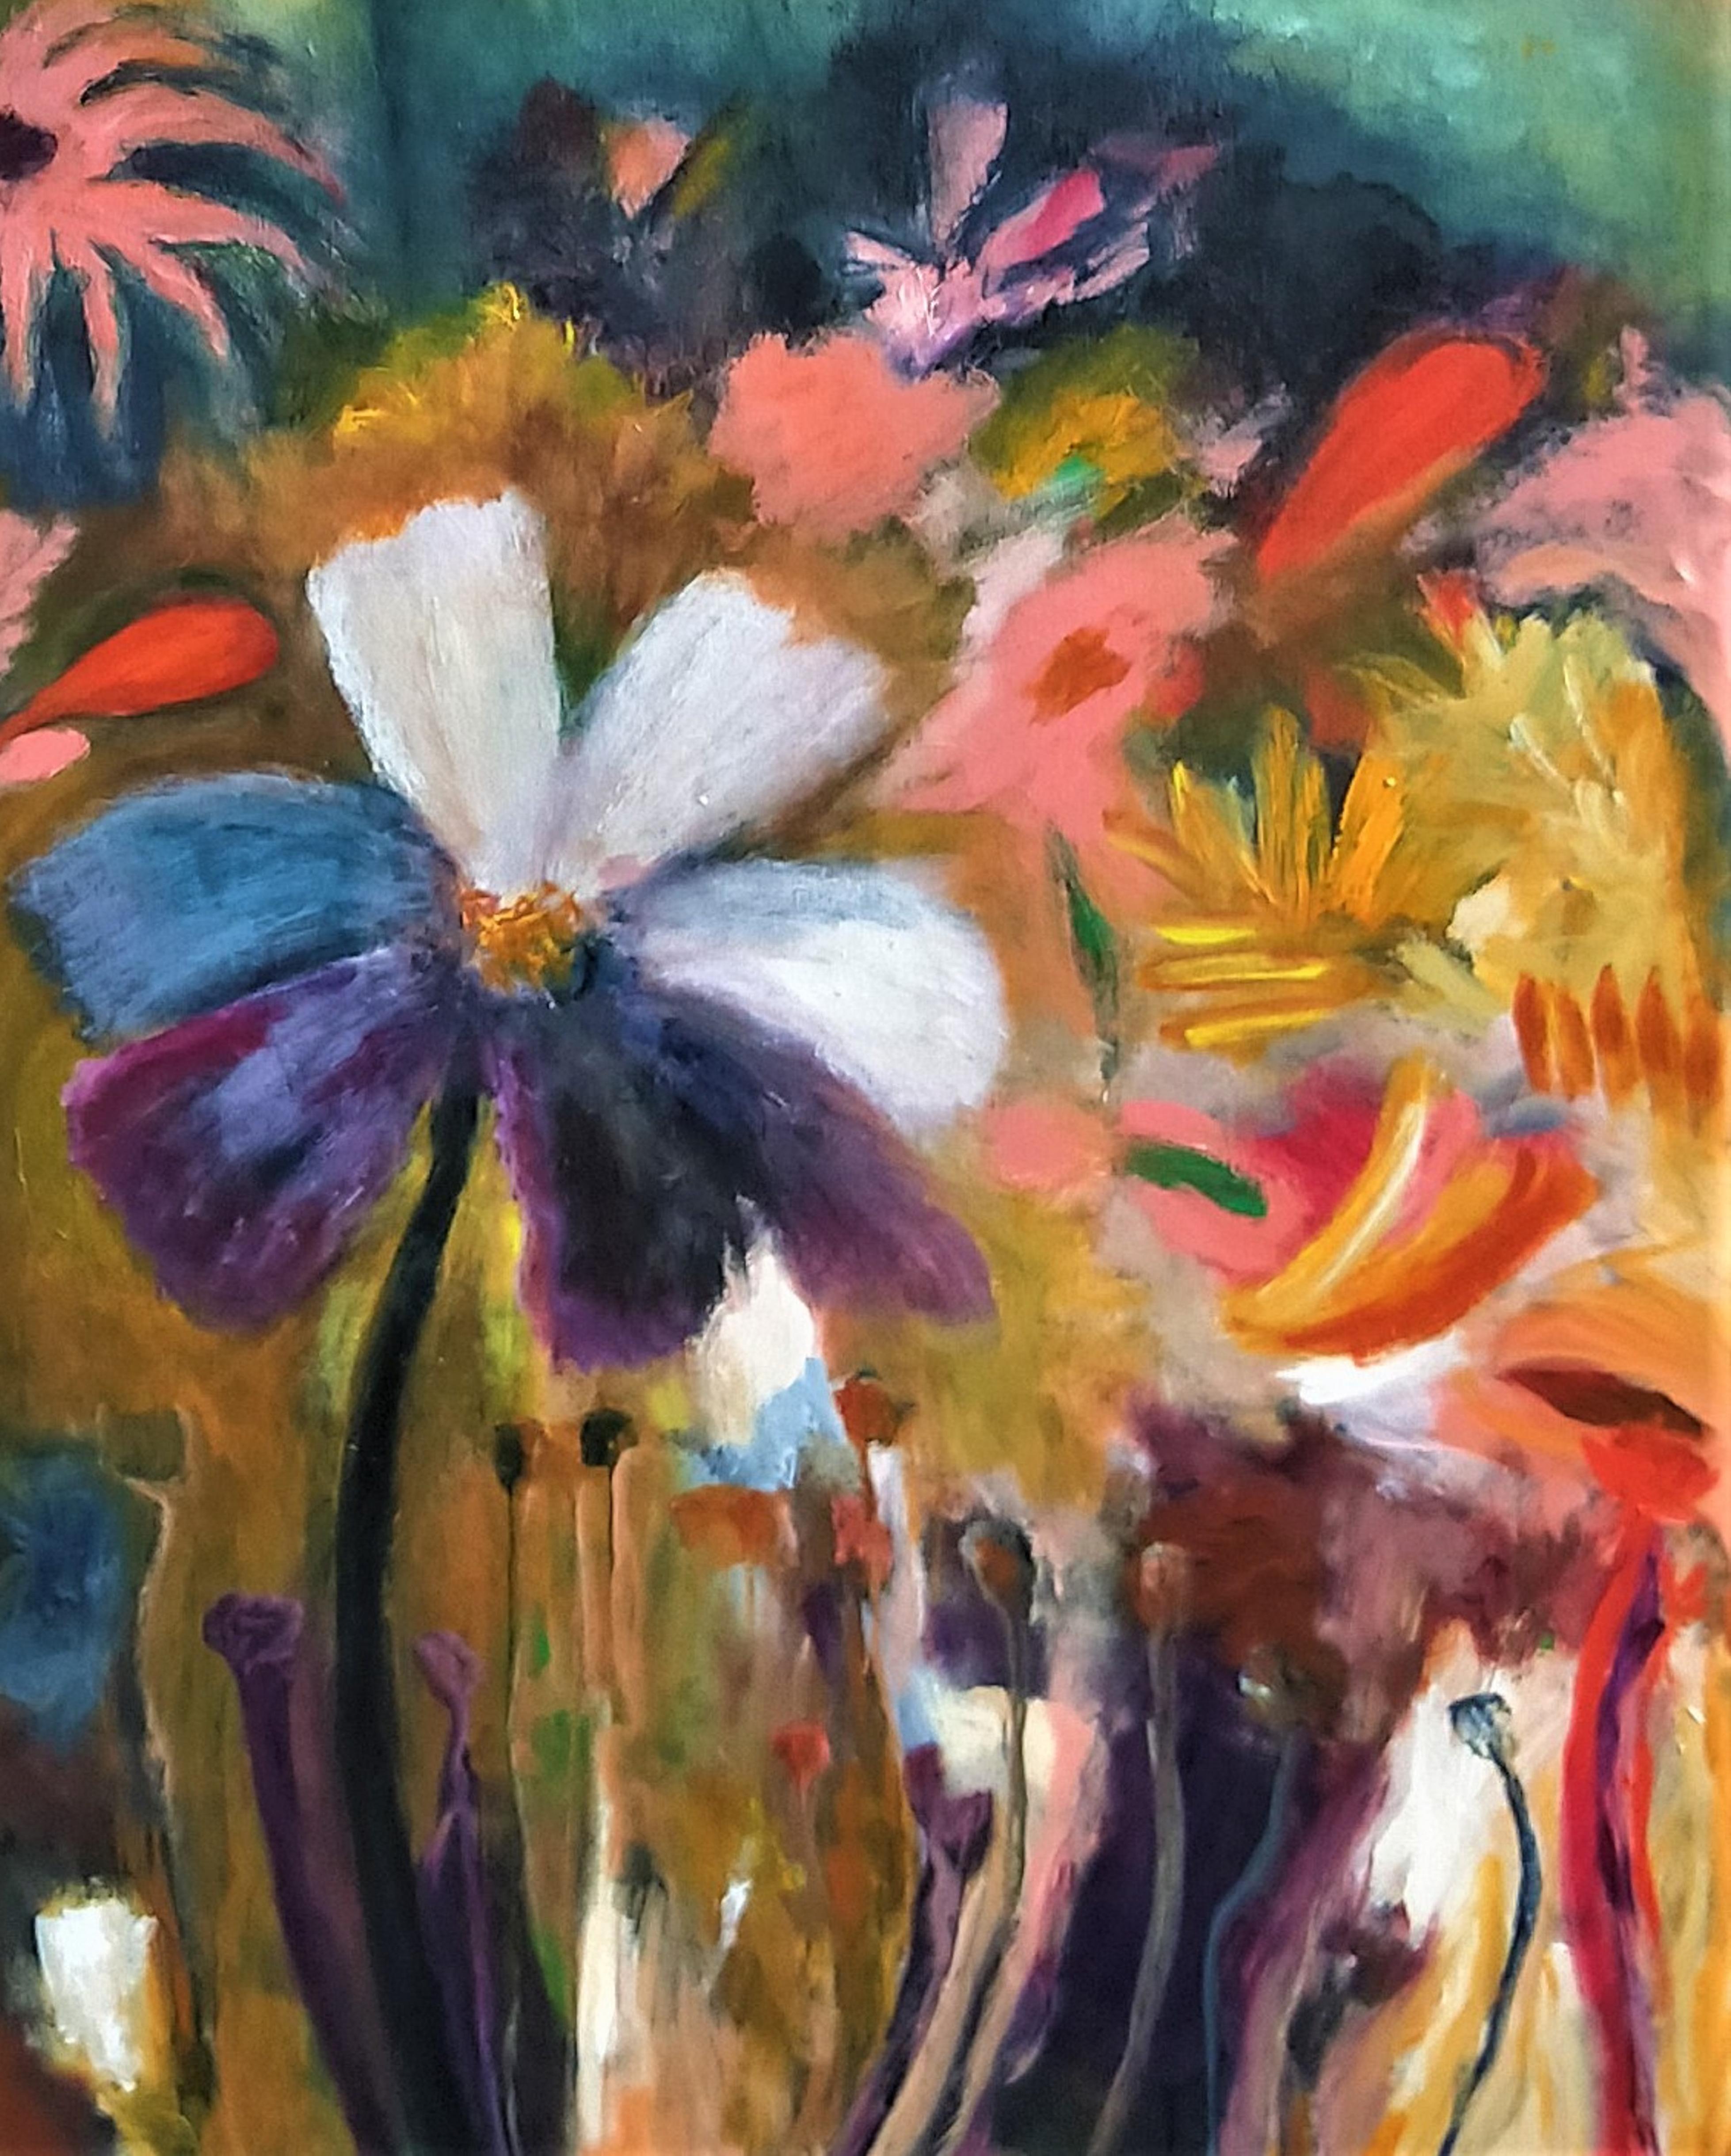 Perpetual Spring by Regina Noakes is an intrinsic example of Noakes' ability to reflect her experiences and journey through her work. Forever nodding to the influence that her heritage has on her work and life, the floral and dream-like palette